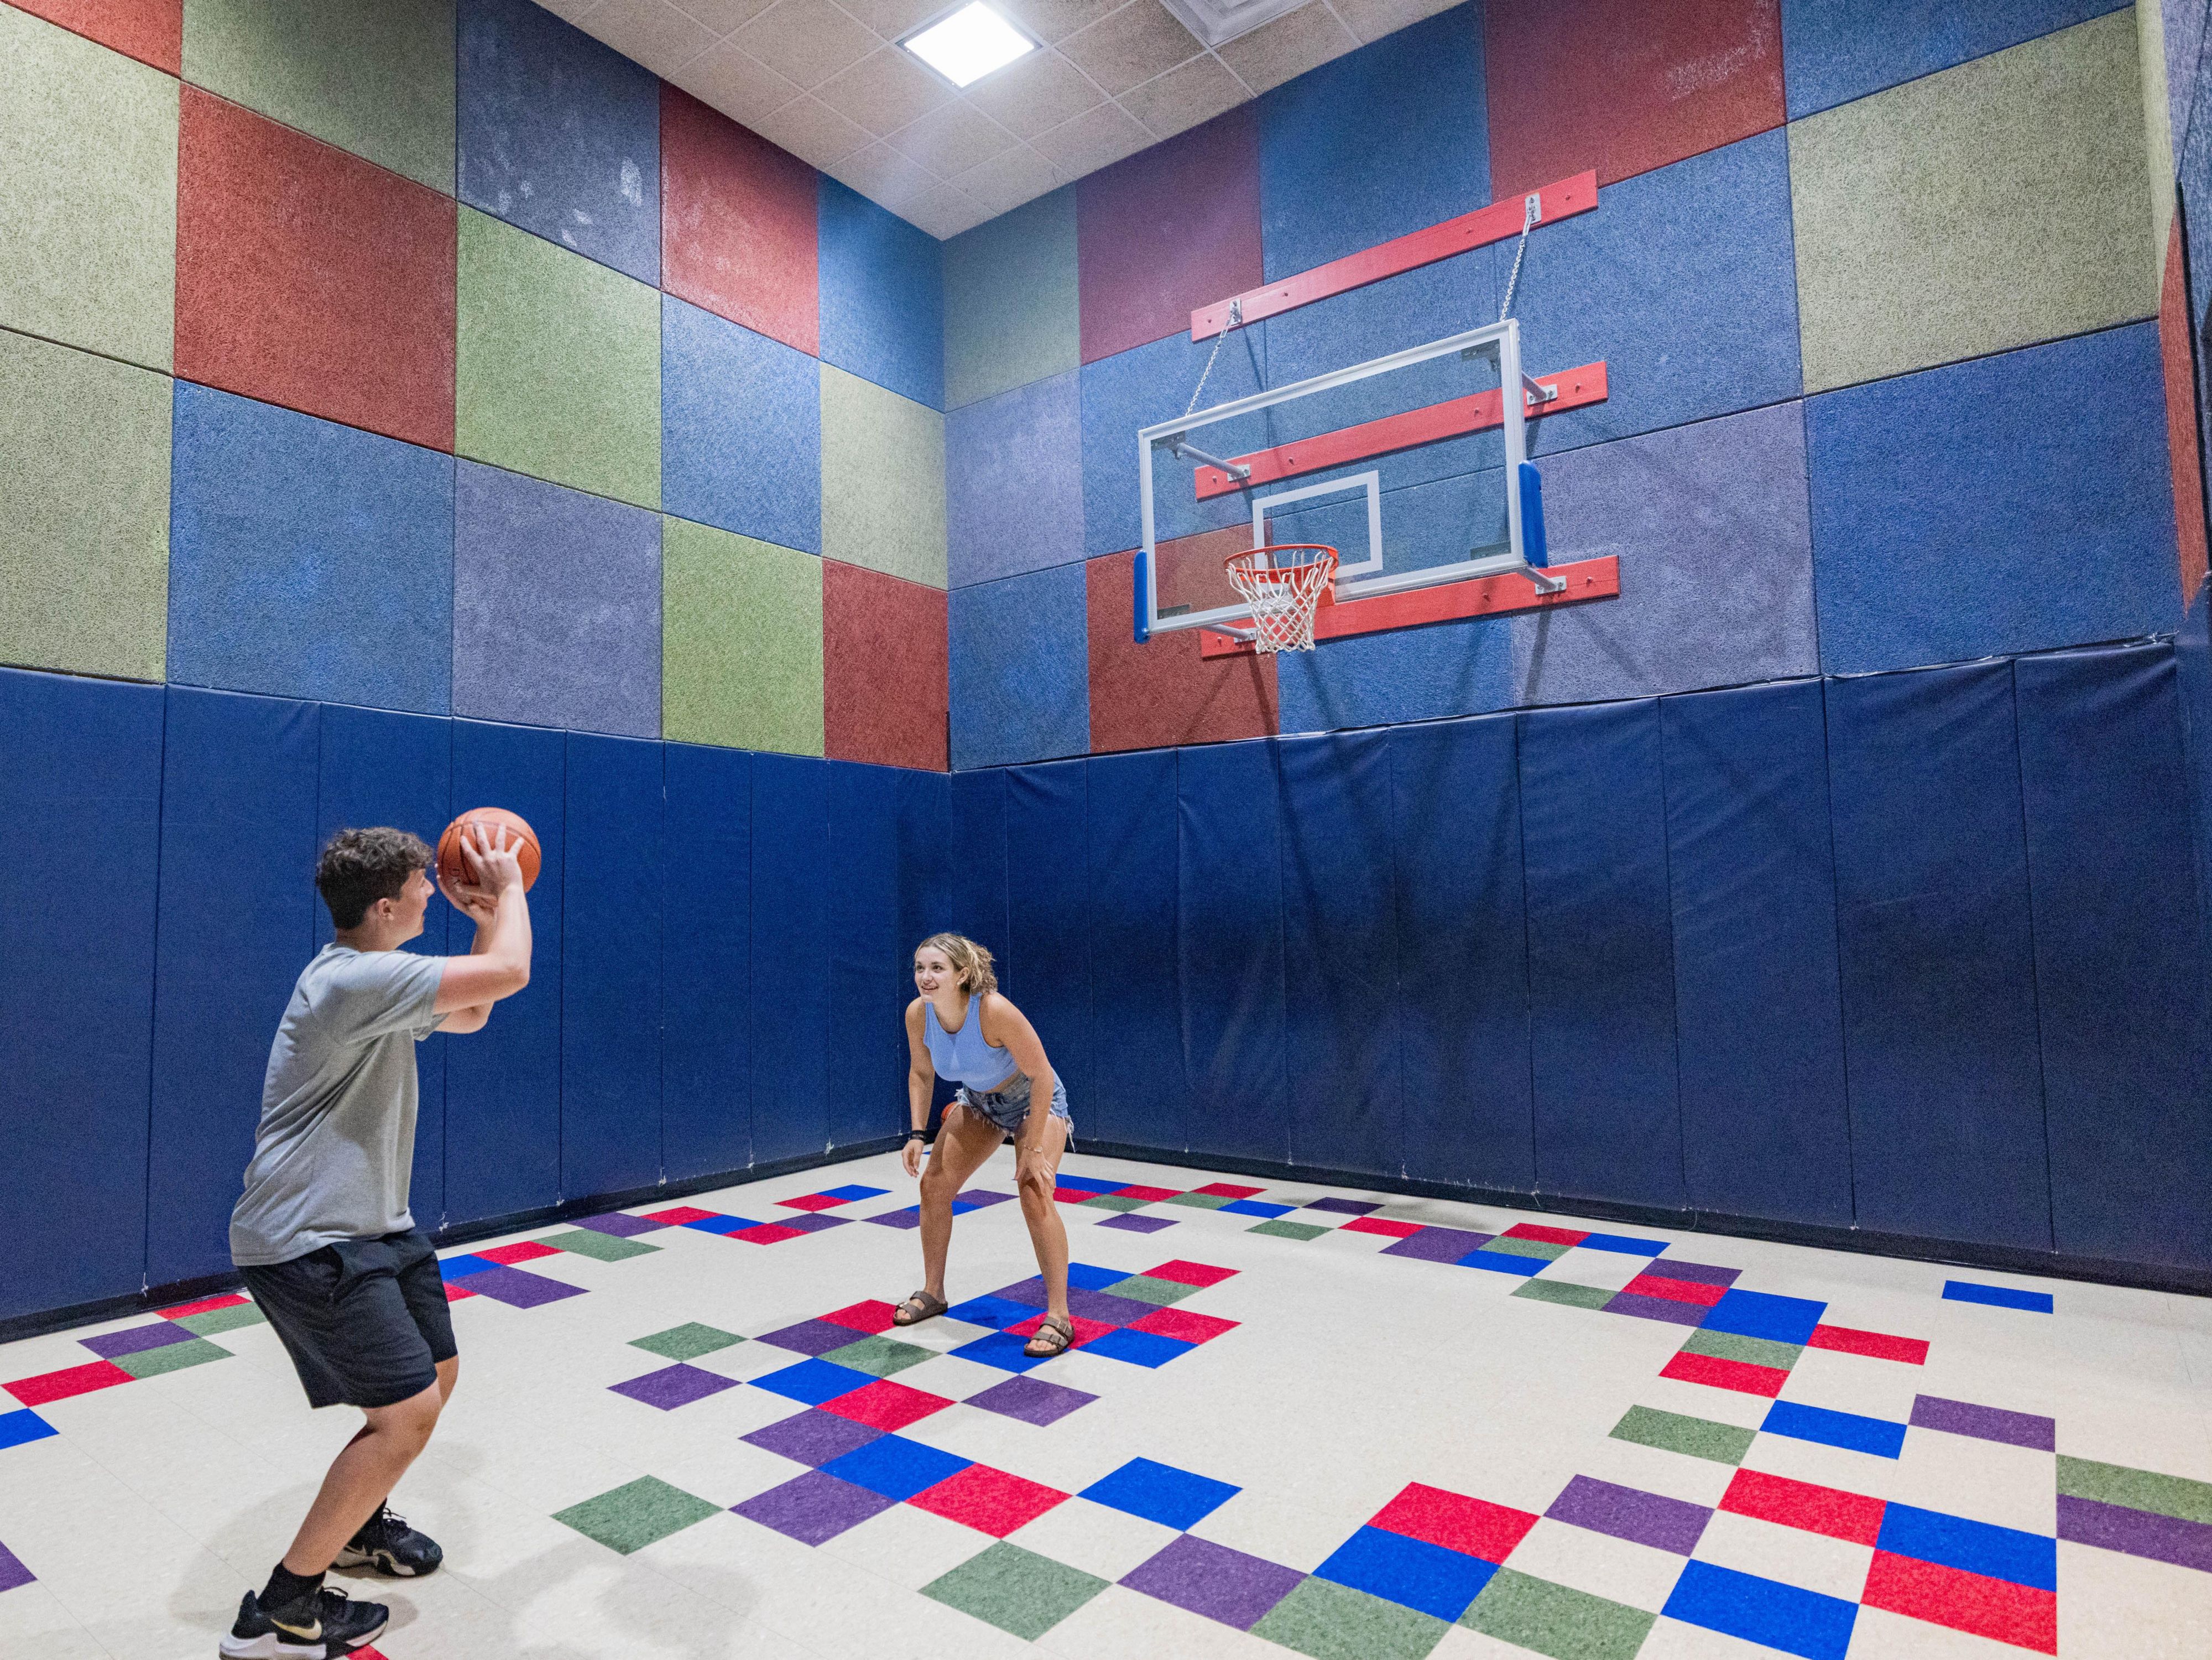 No matter what the weather looks like outside, you can play a game of basketball in our indoor sport court at any time. Lace up your sneakers, round up a group of friends and get moving.